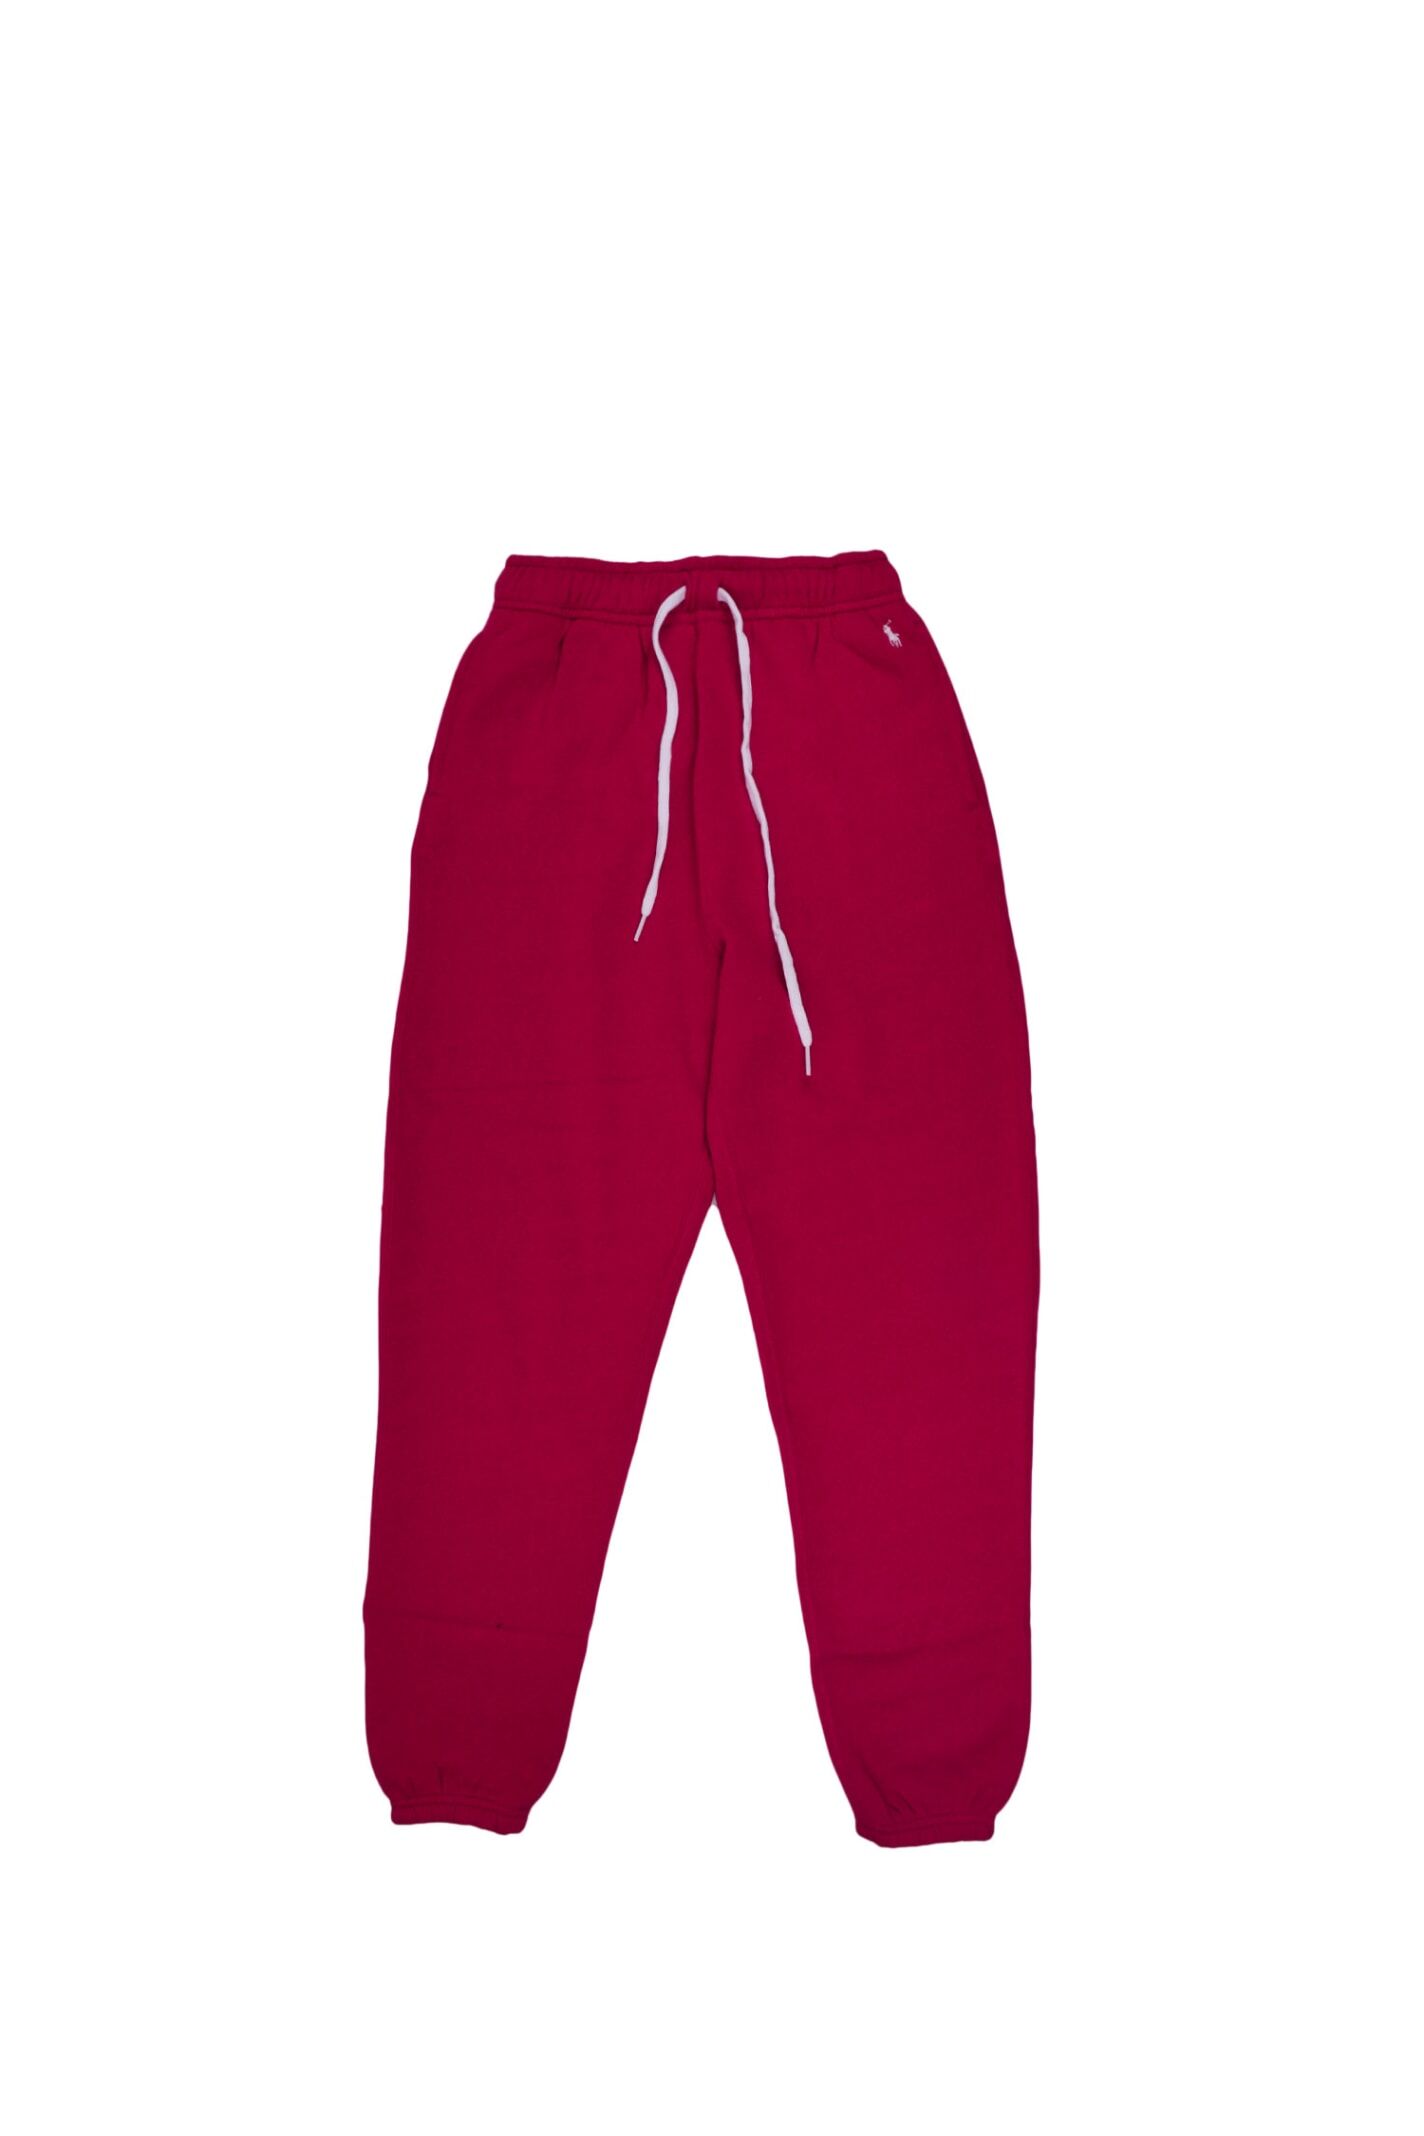 Sport Trousers Polo Ralph Lauren - female - Size: Extra Small